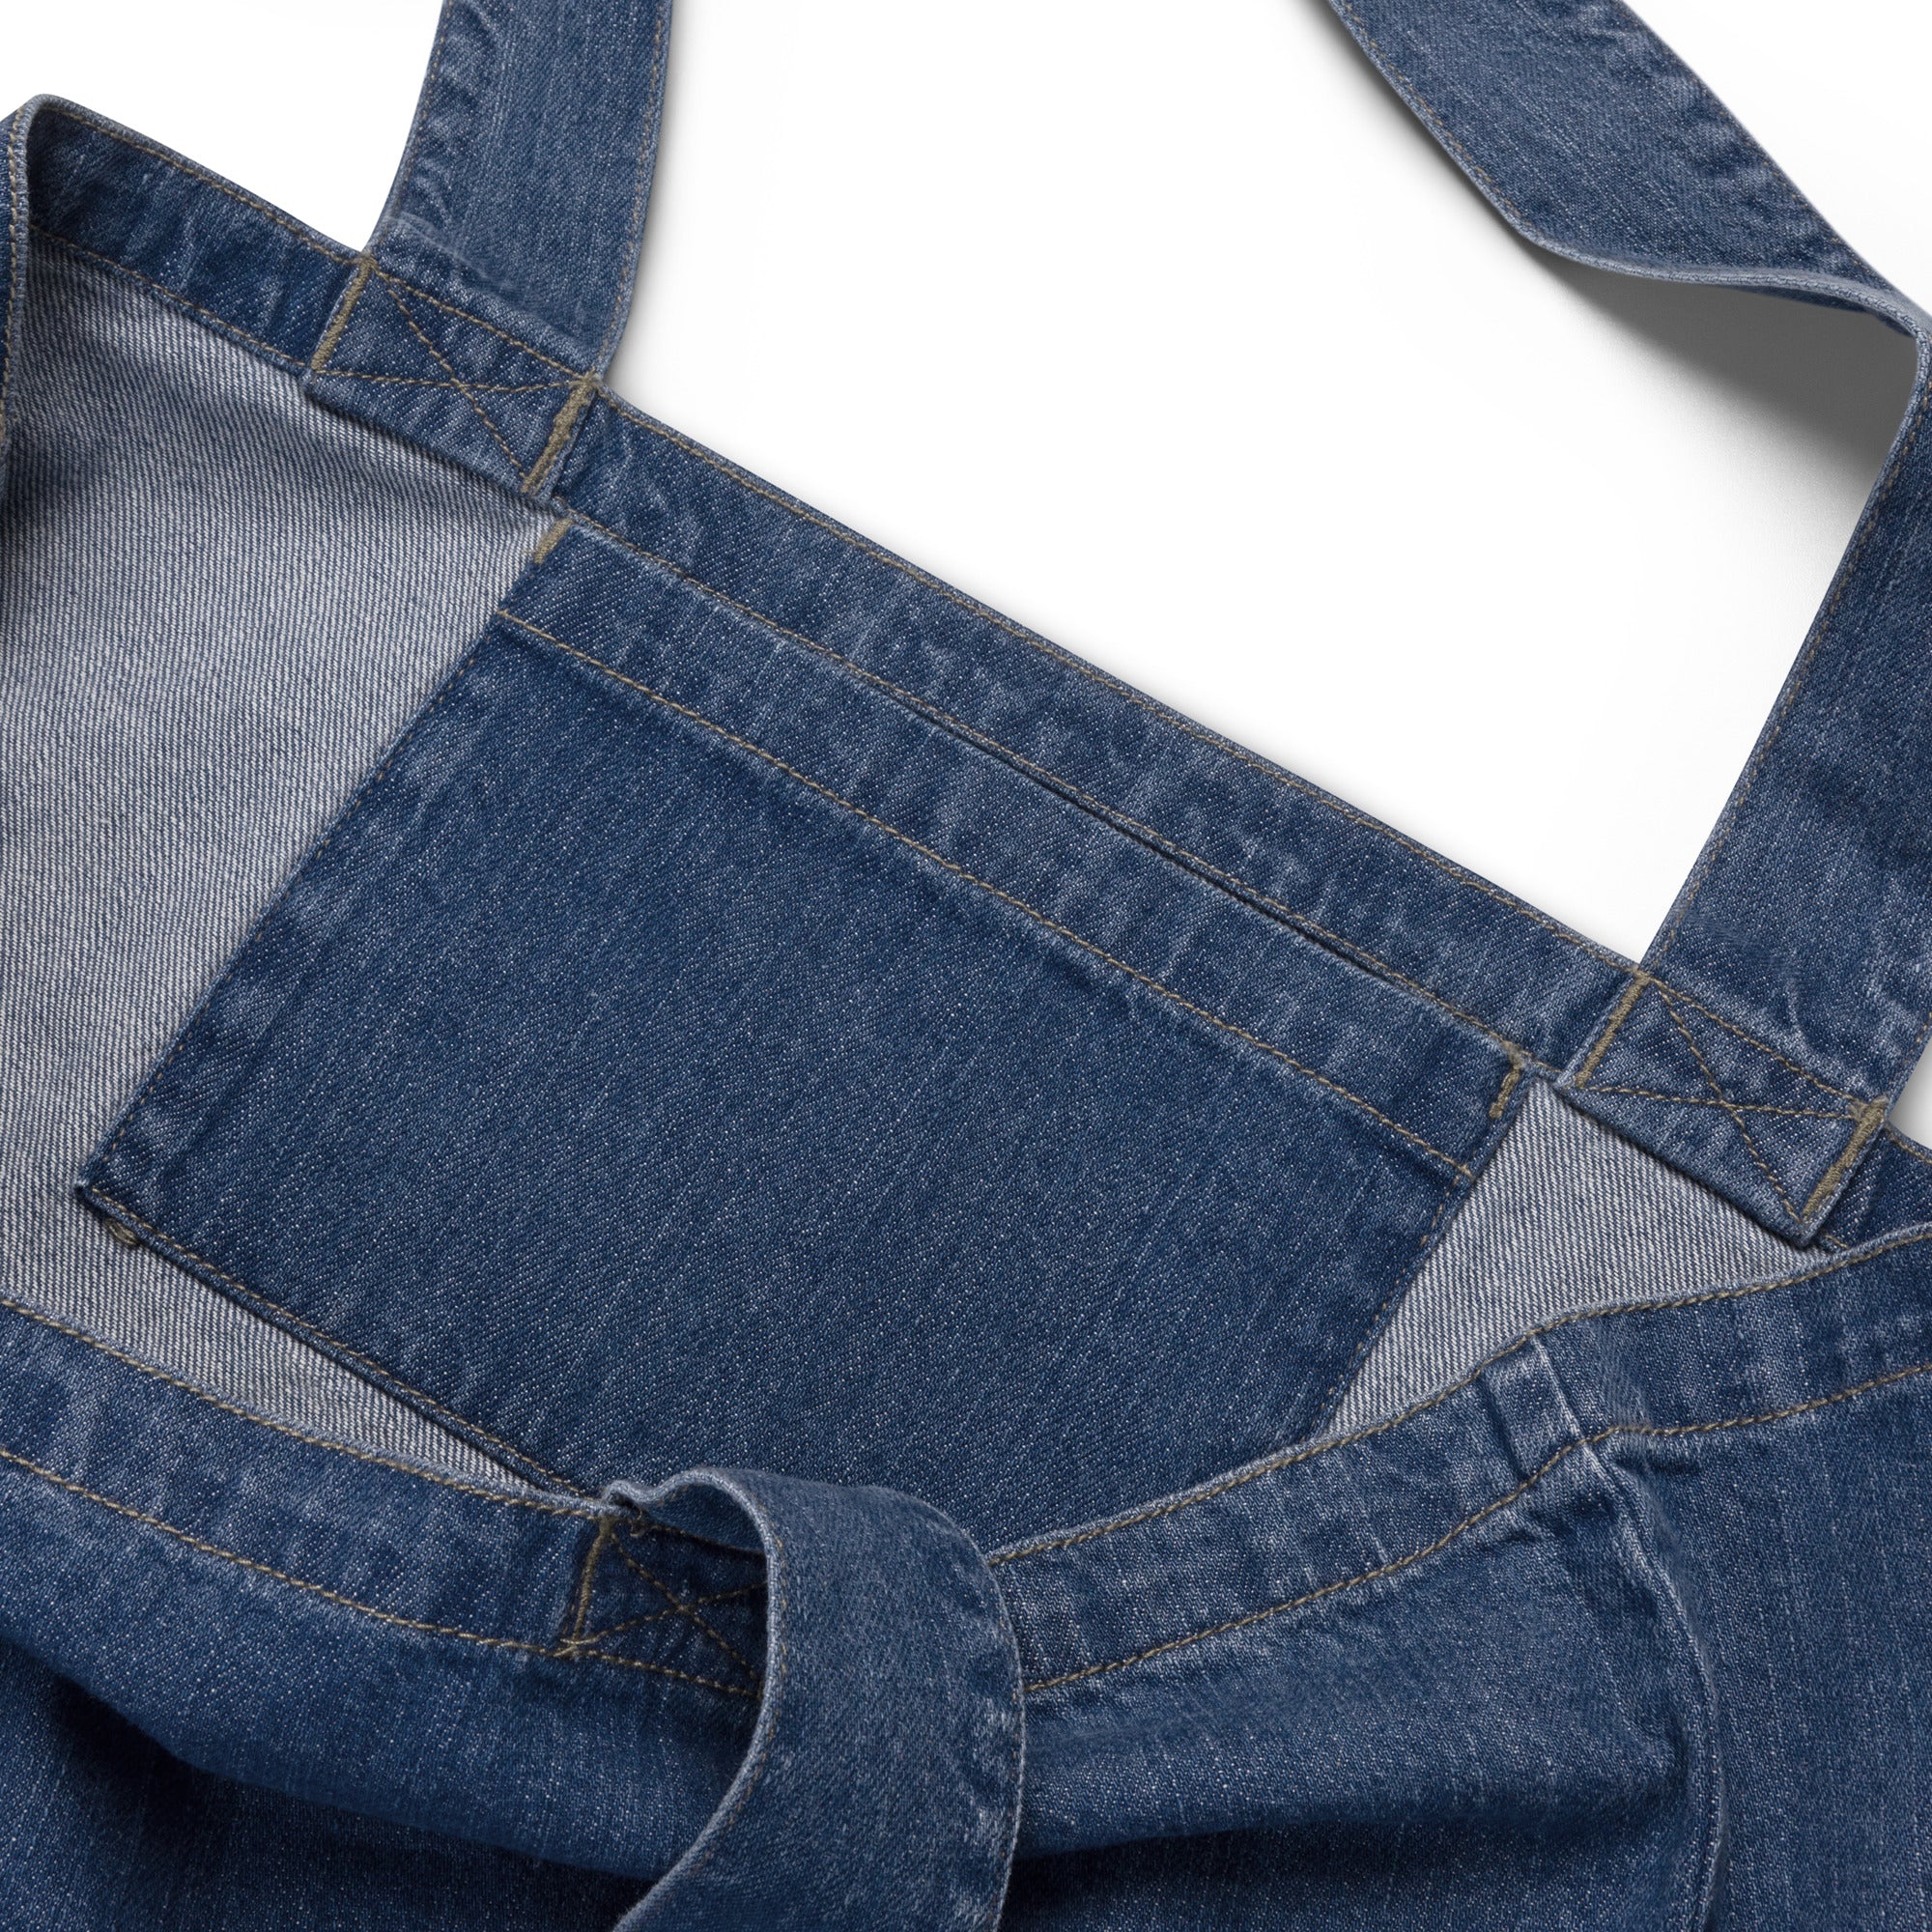 Ever Since Prince Died -- the organic denim tote bag (clean version)